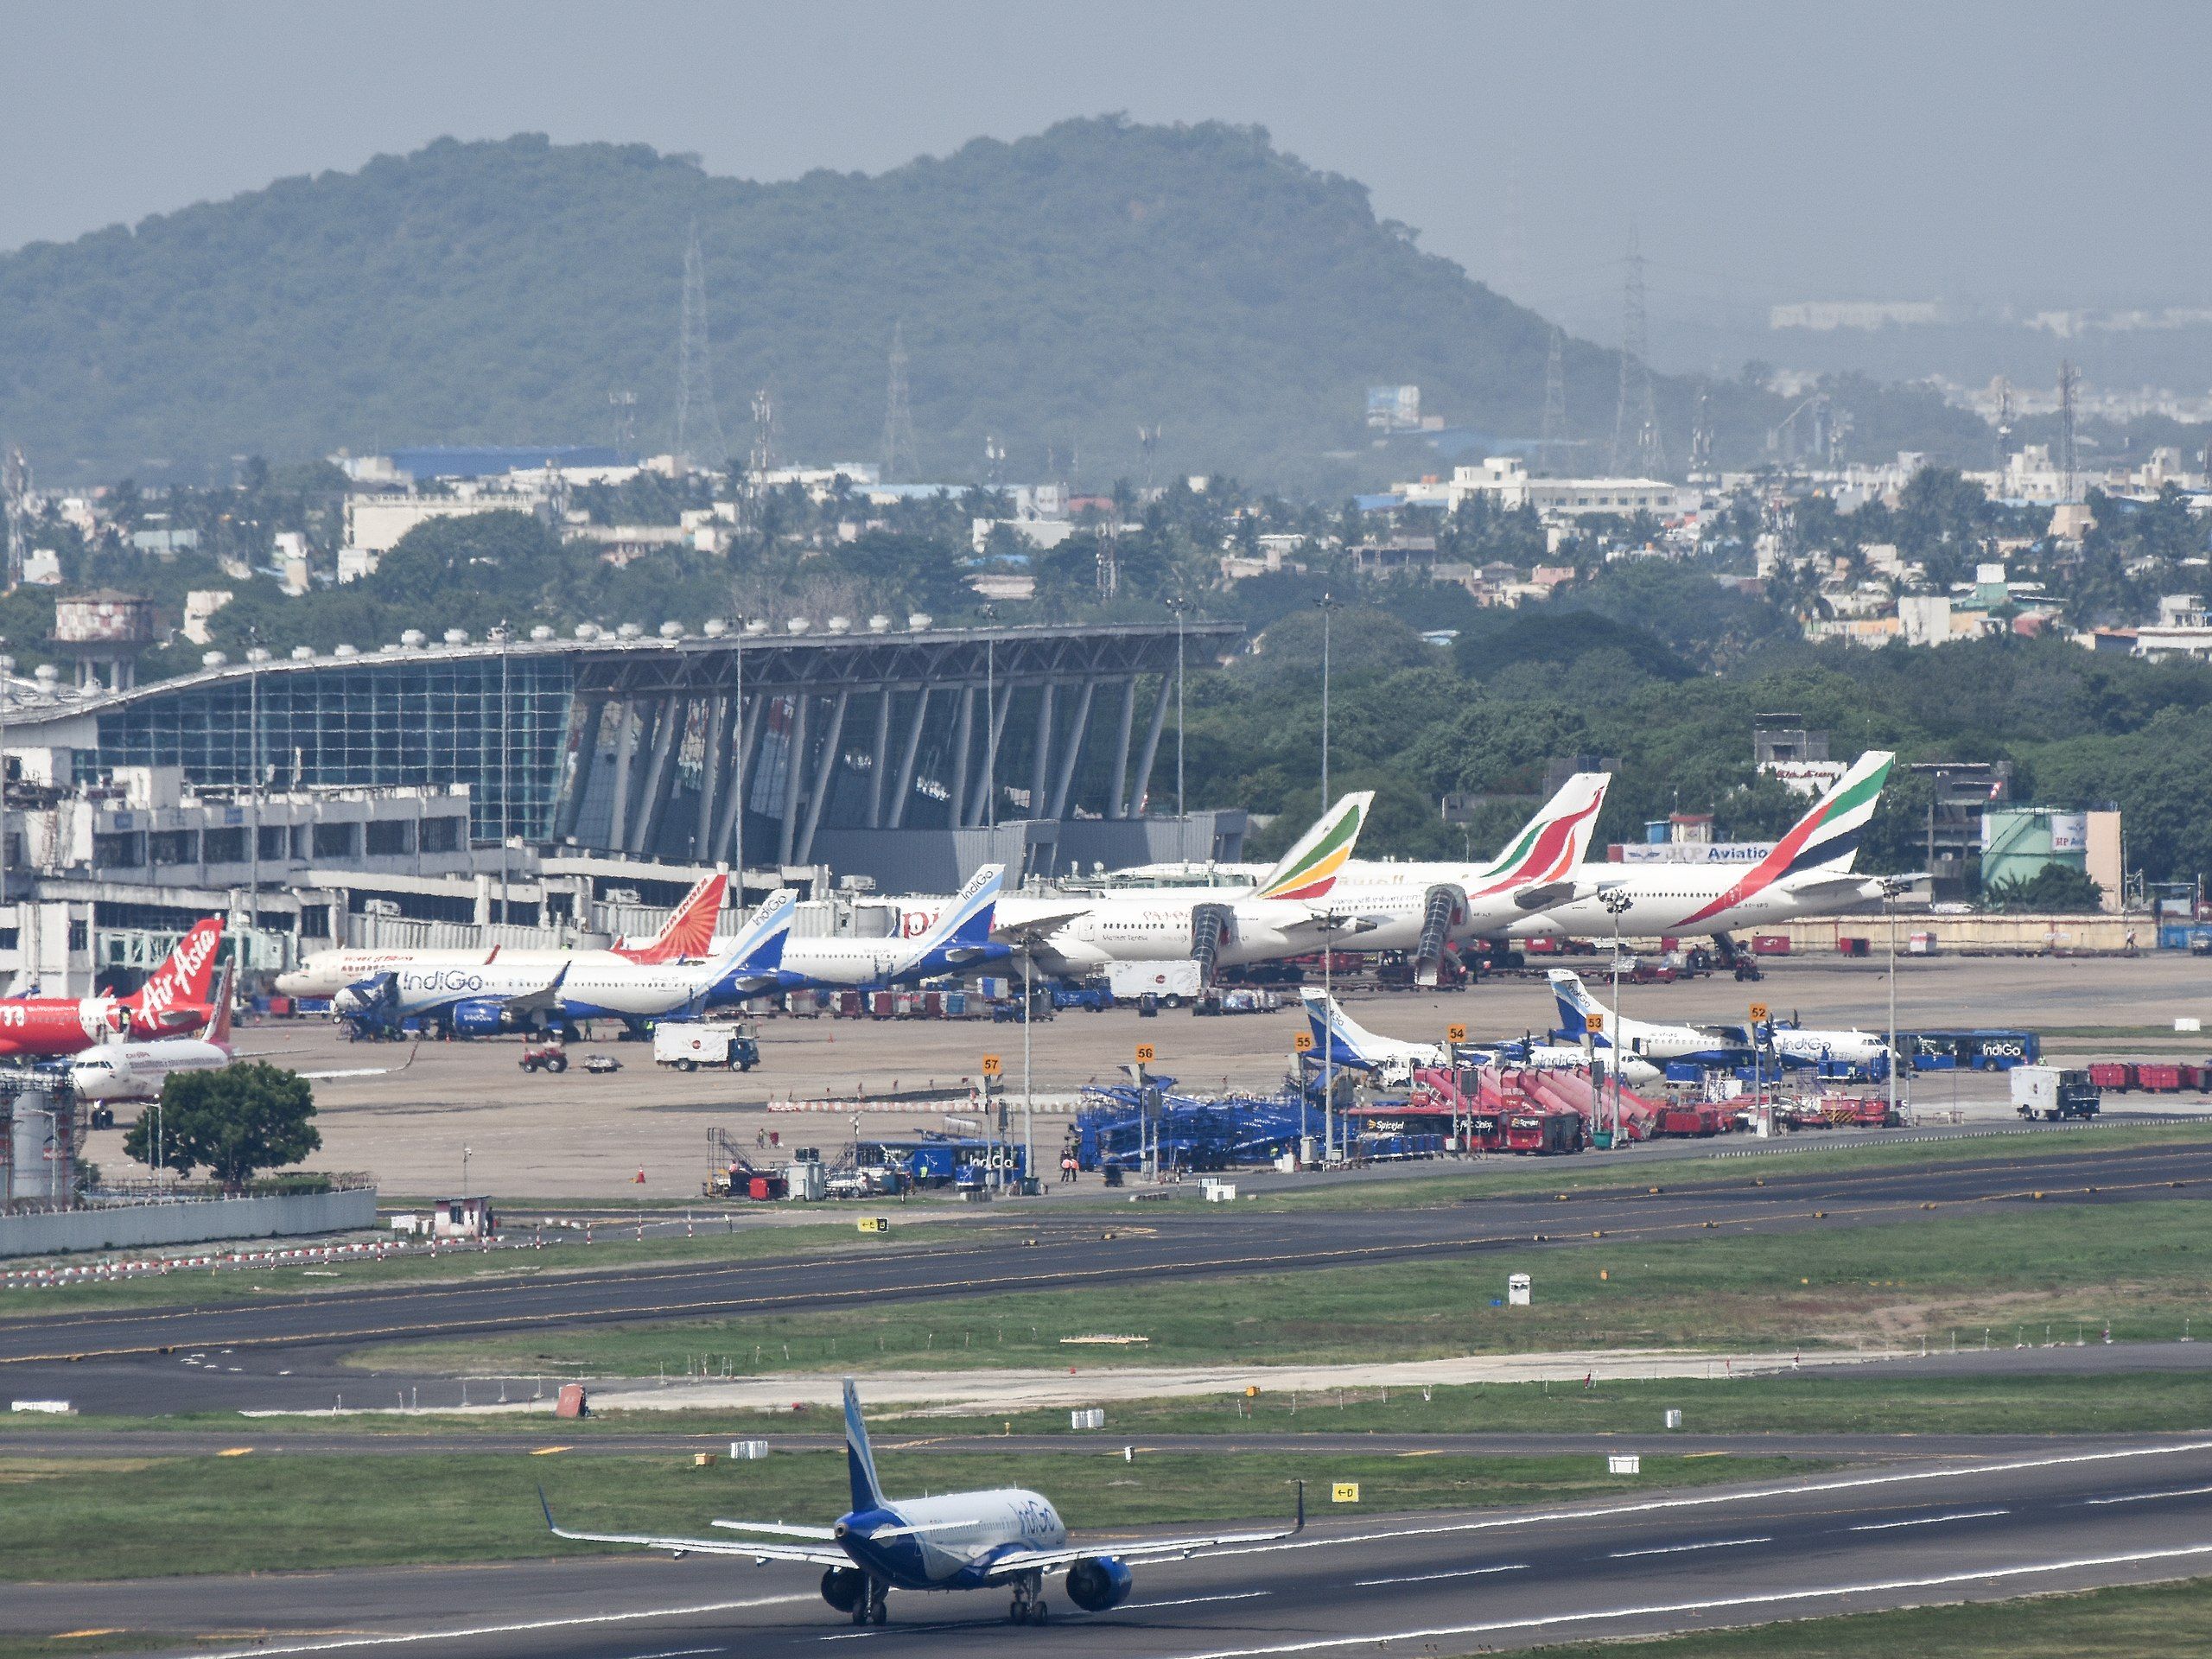 Several aircraft parked on the taxiway outside a terminal building with a mountain in the background